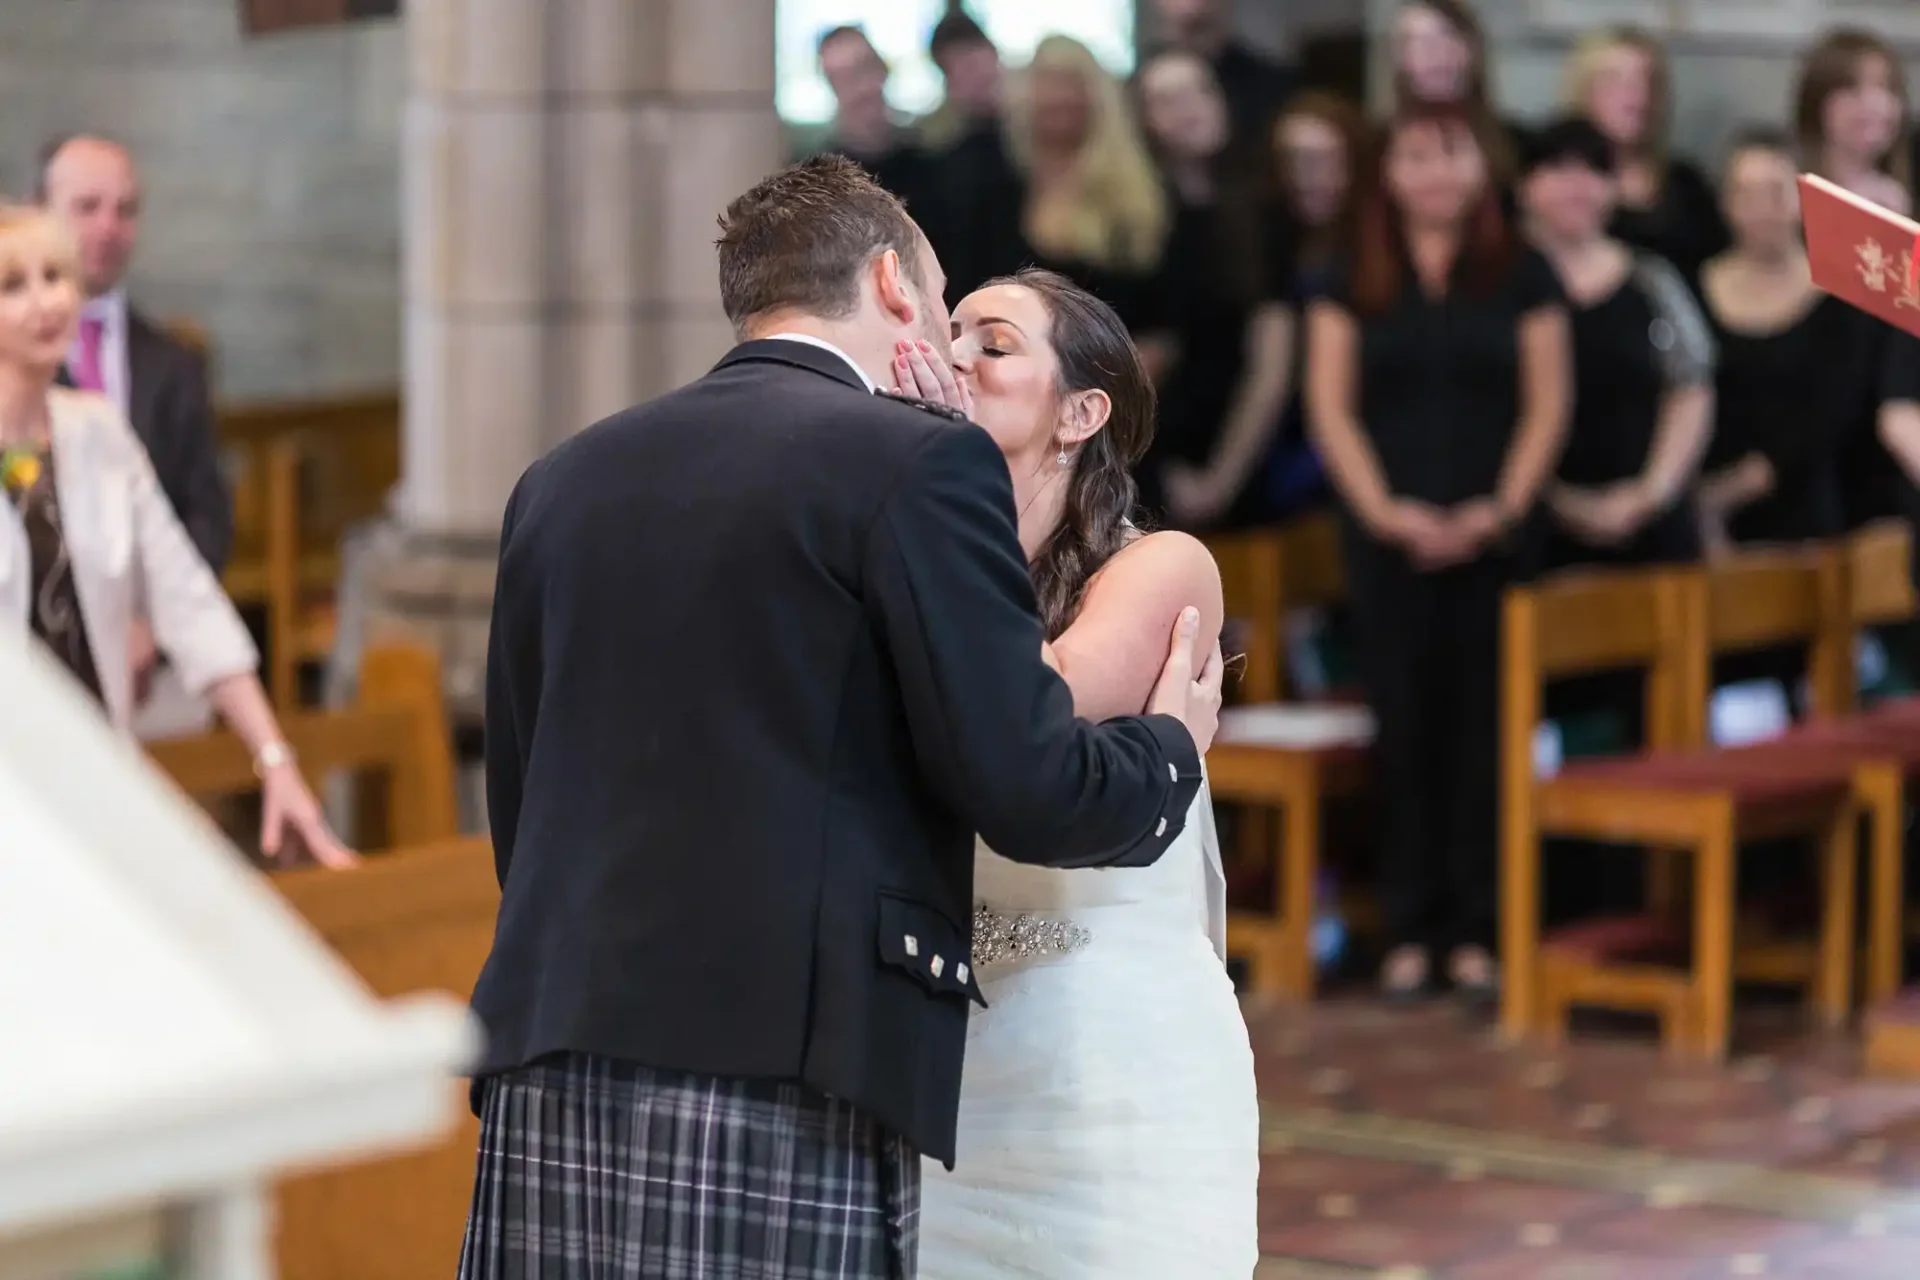 A bride and groom kissing at the altar in a church, with guests in the background and a man in a kilt visible.